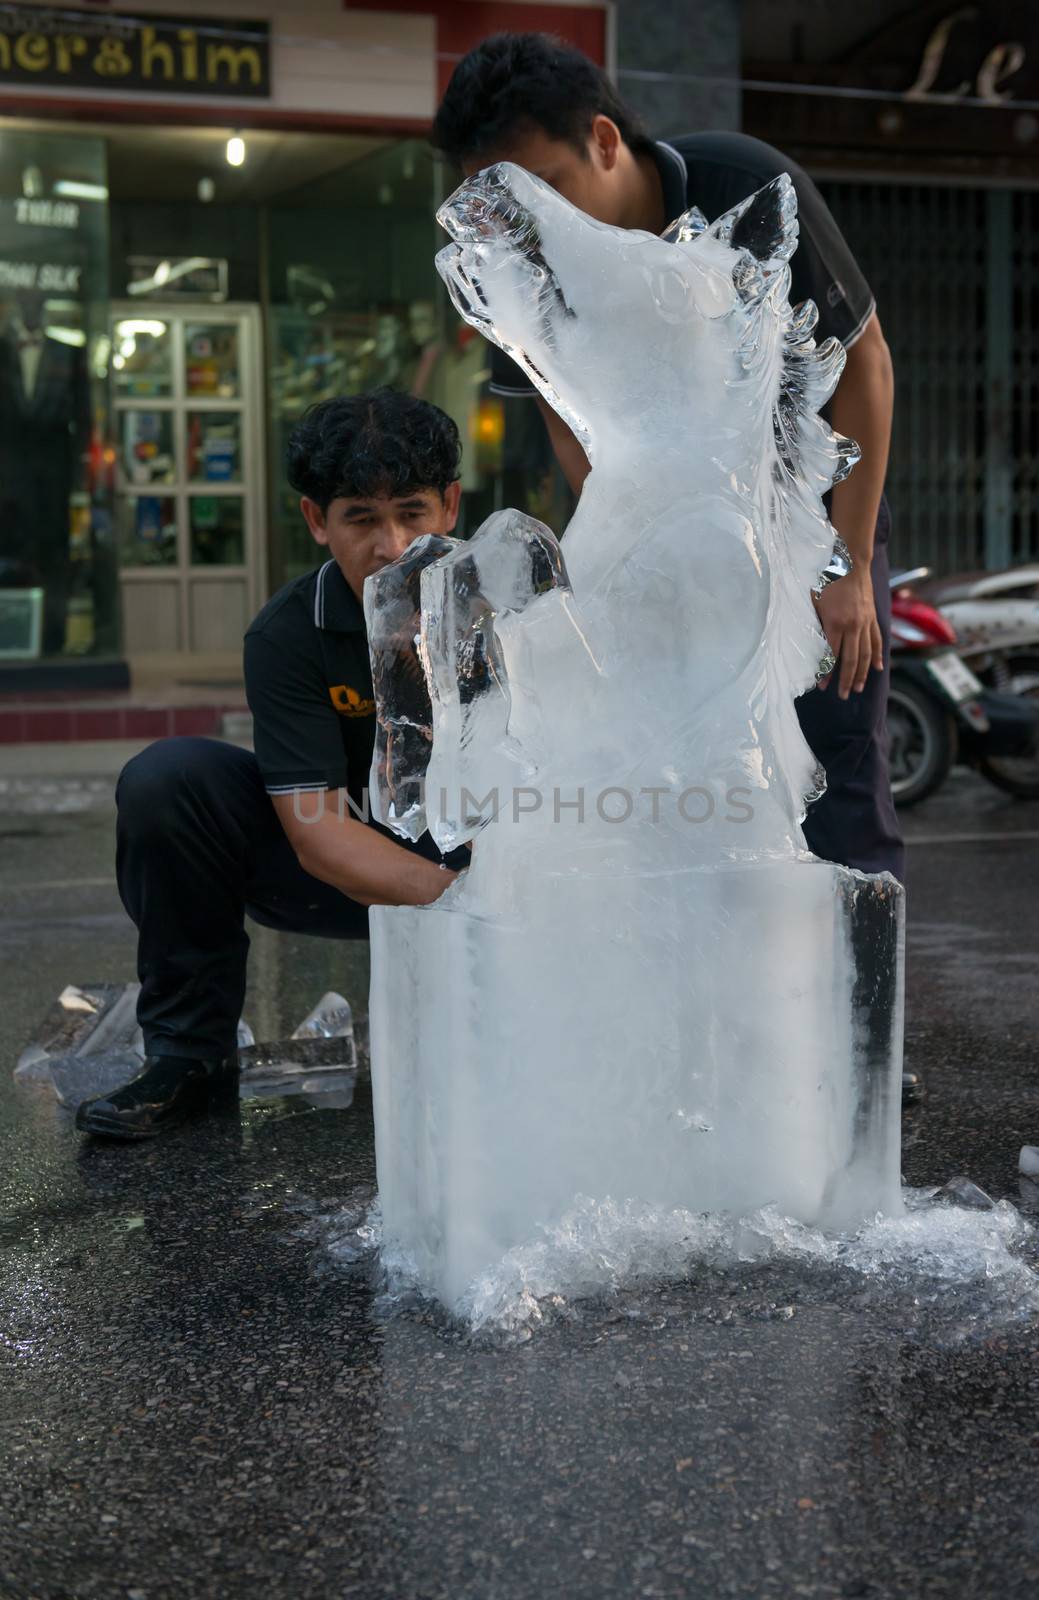 PHUKET, THAILAND - 07 FEB 2014: Unidentified men cut out icy horse for annual old Phuket town festival. 